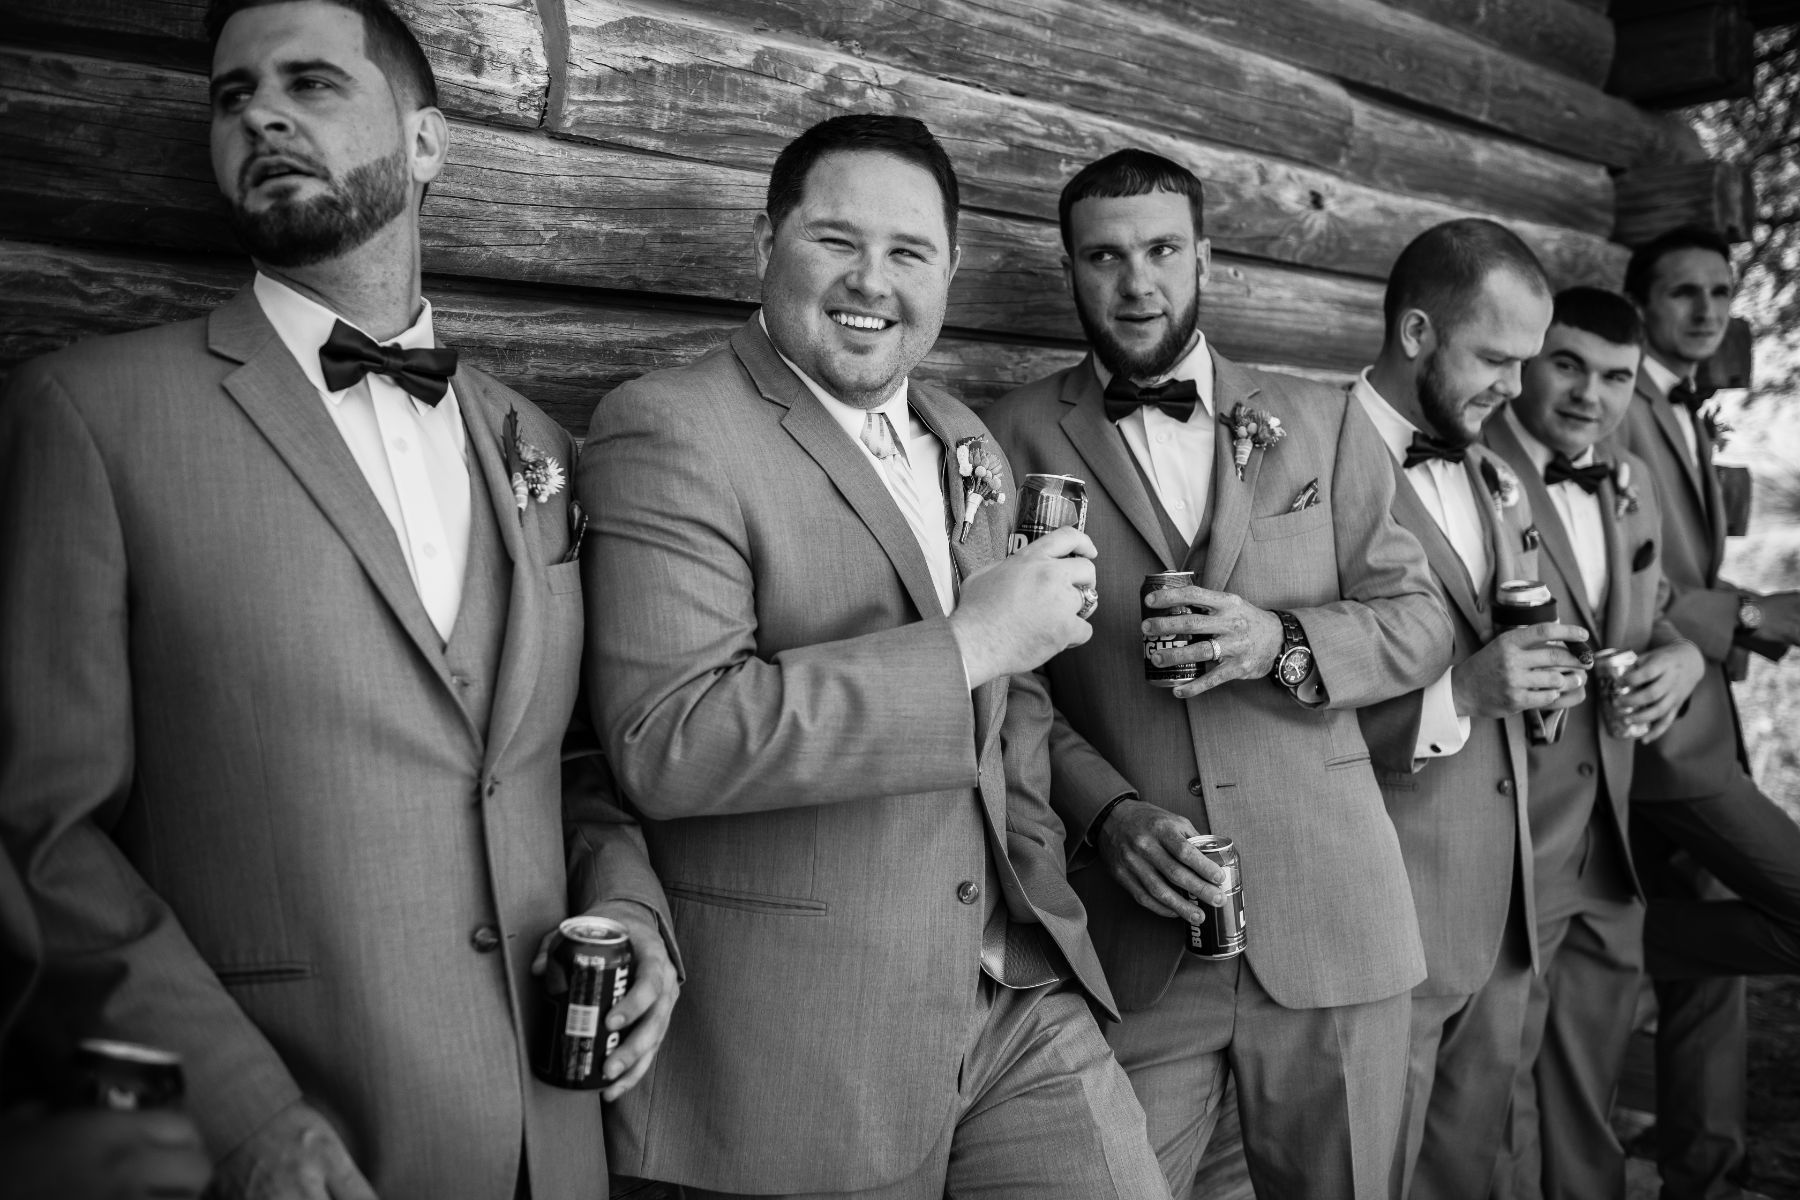 Groom and groomsmen drink beverages and smile while leaning against a rustic wood wall.